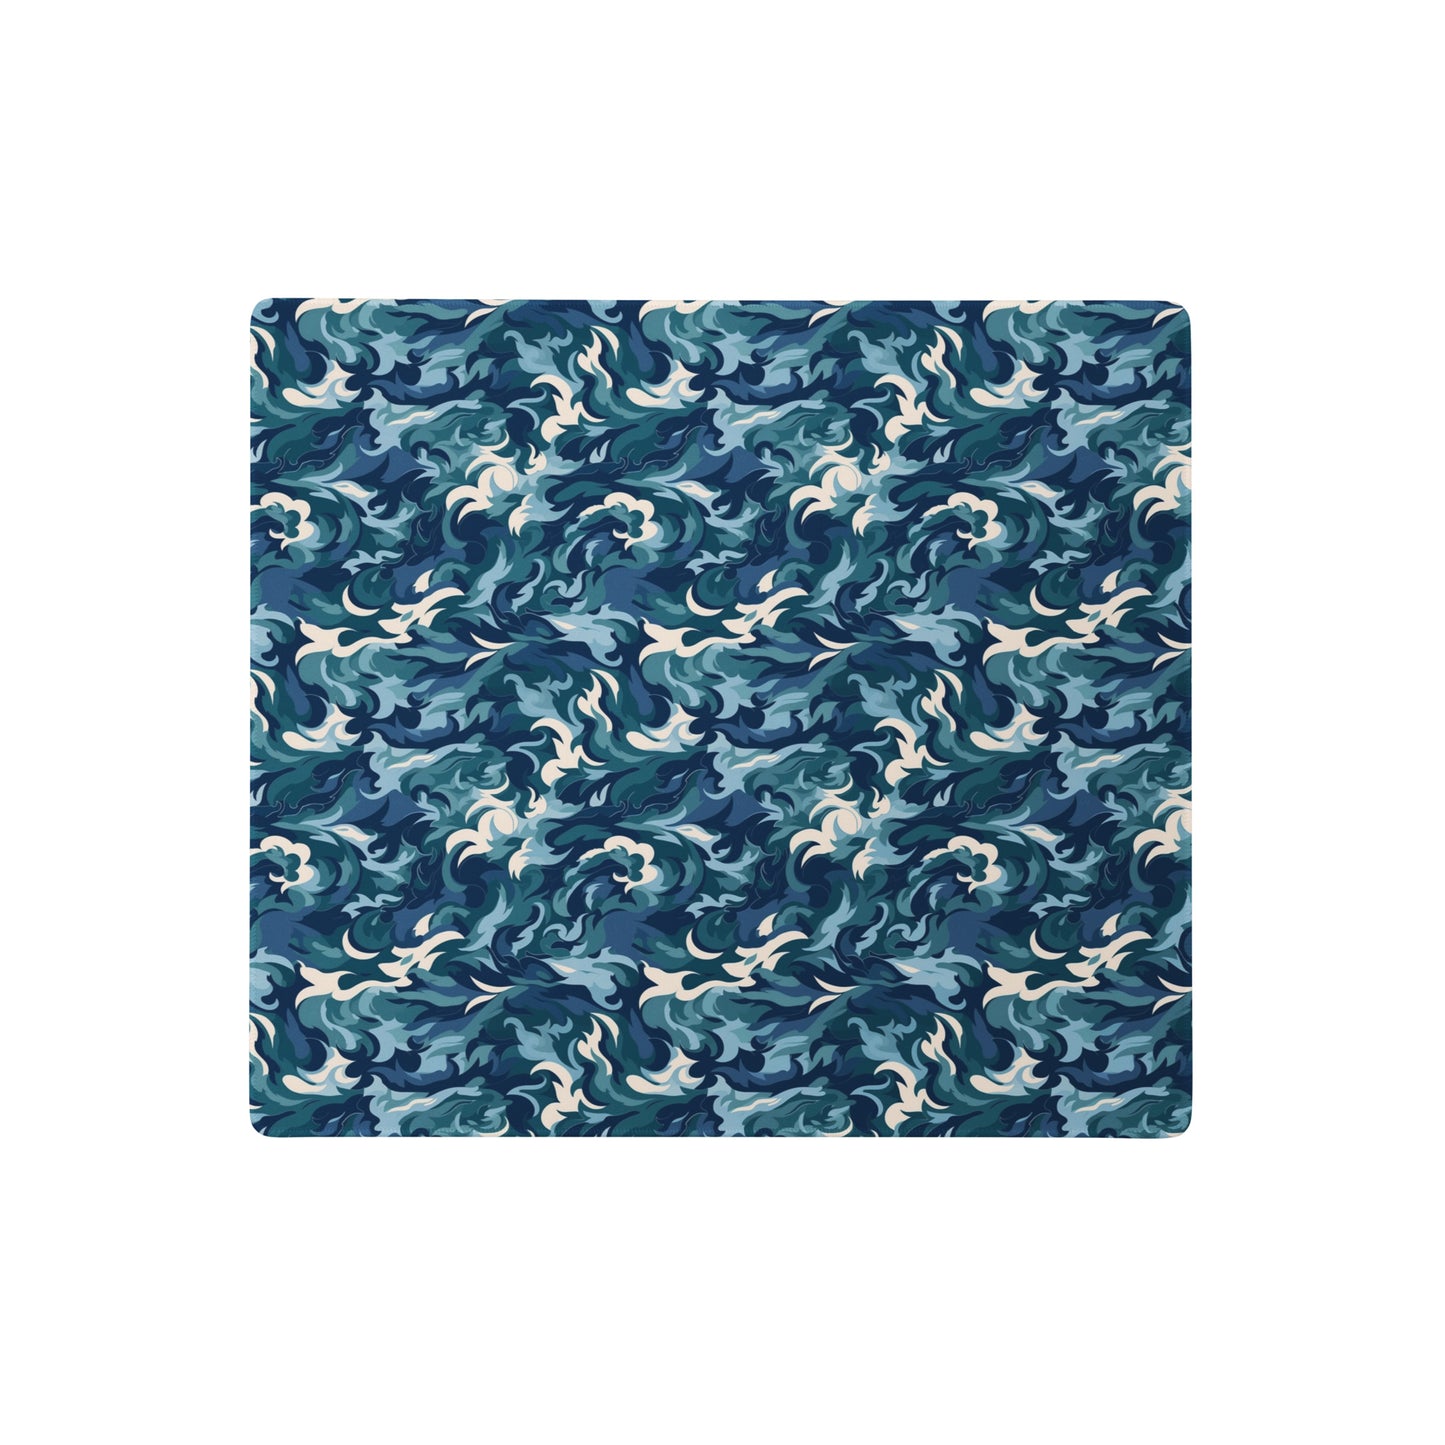 A 18" x 16" desk pad with a teal and white camo pattern.